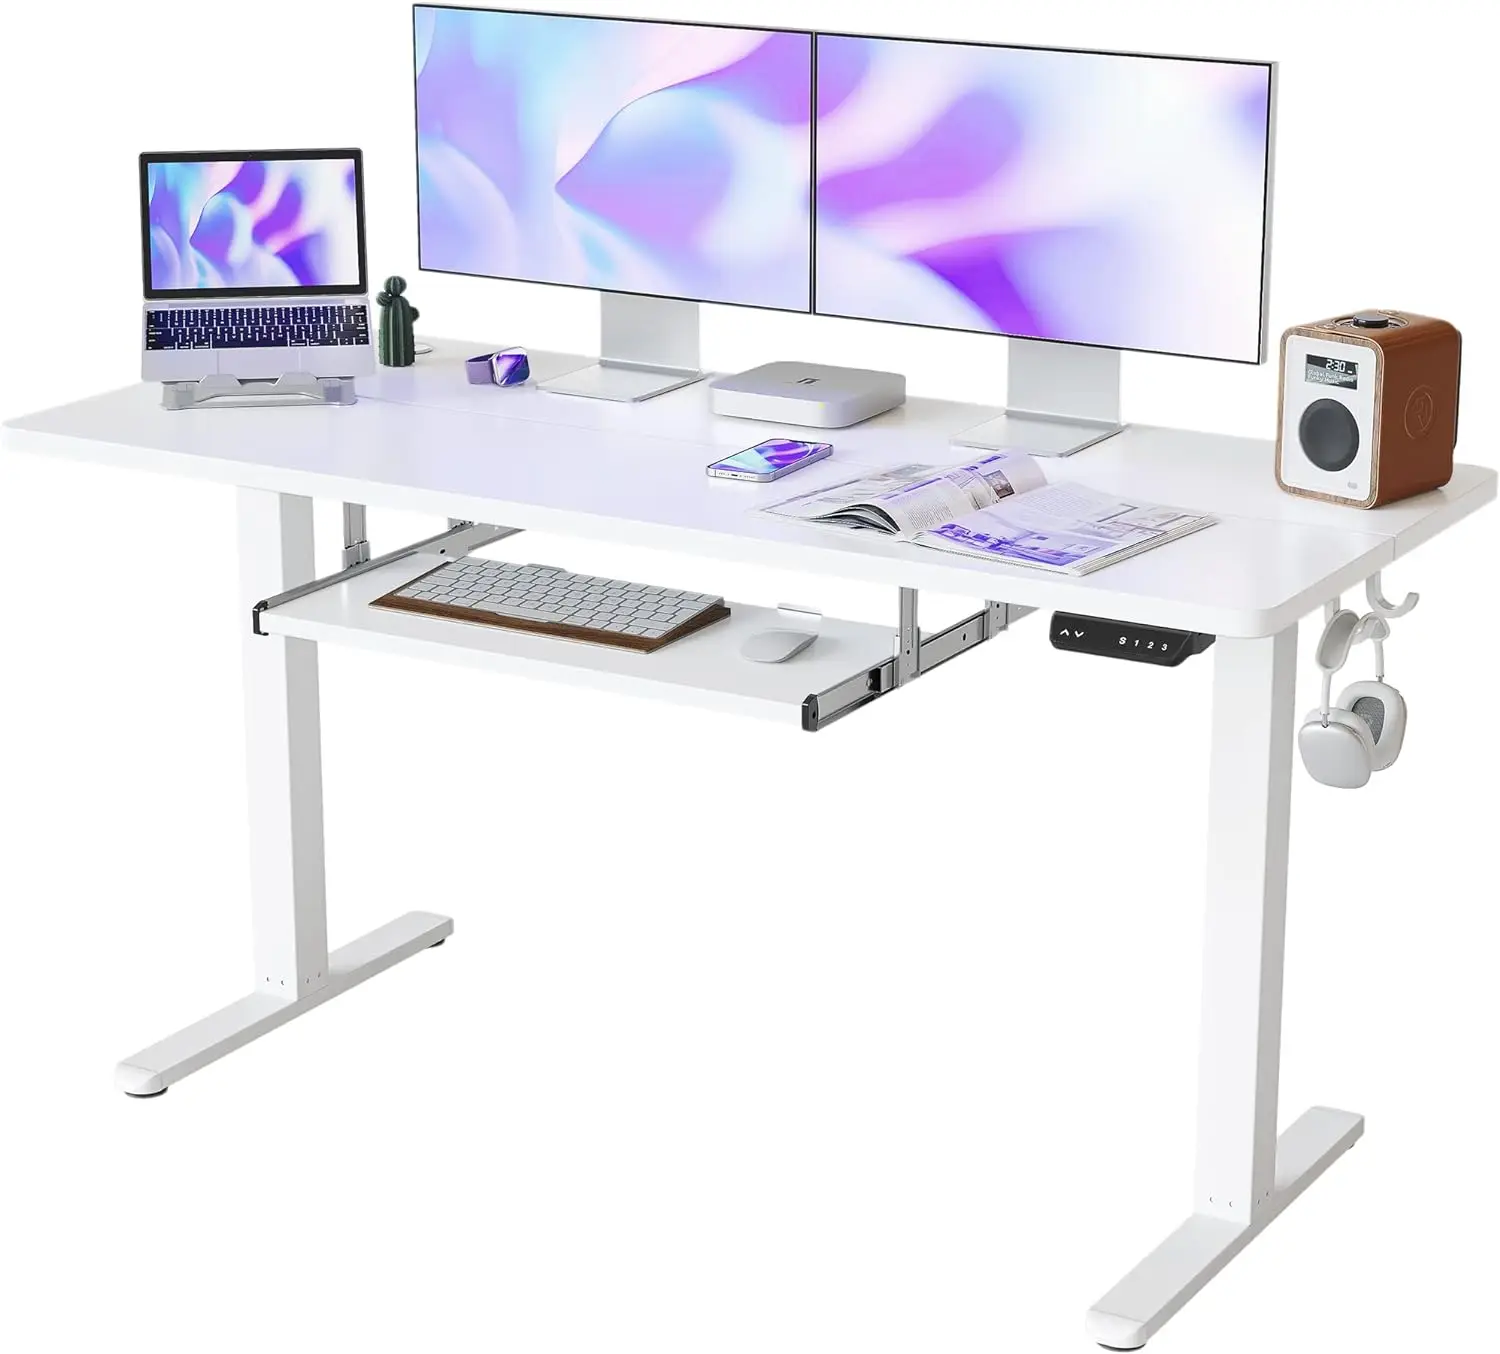 

FEZIBO Standing Desk with Keyboard Tray, 55 × 24 Inches Electric Height Adjustable Desk, Sit Stand Up Desk,